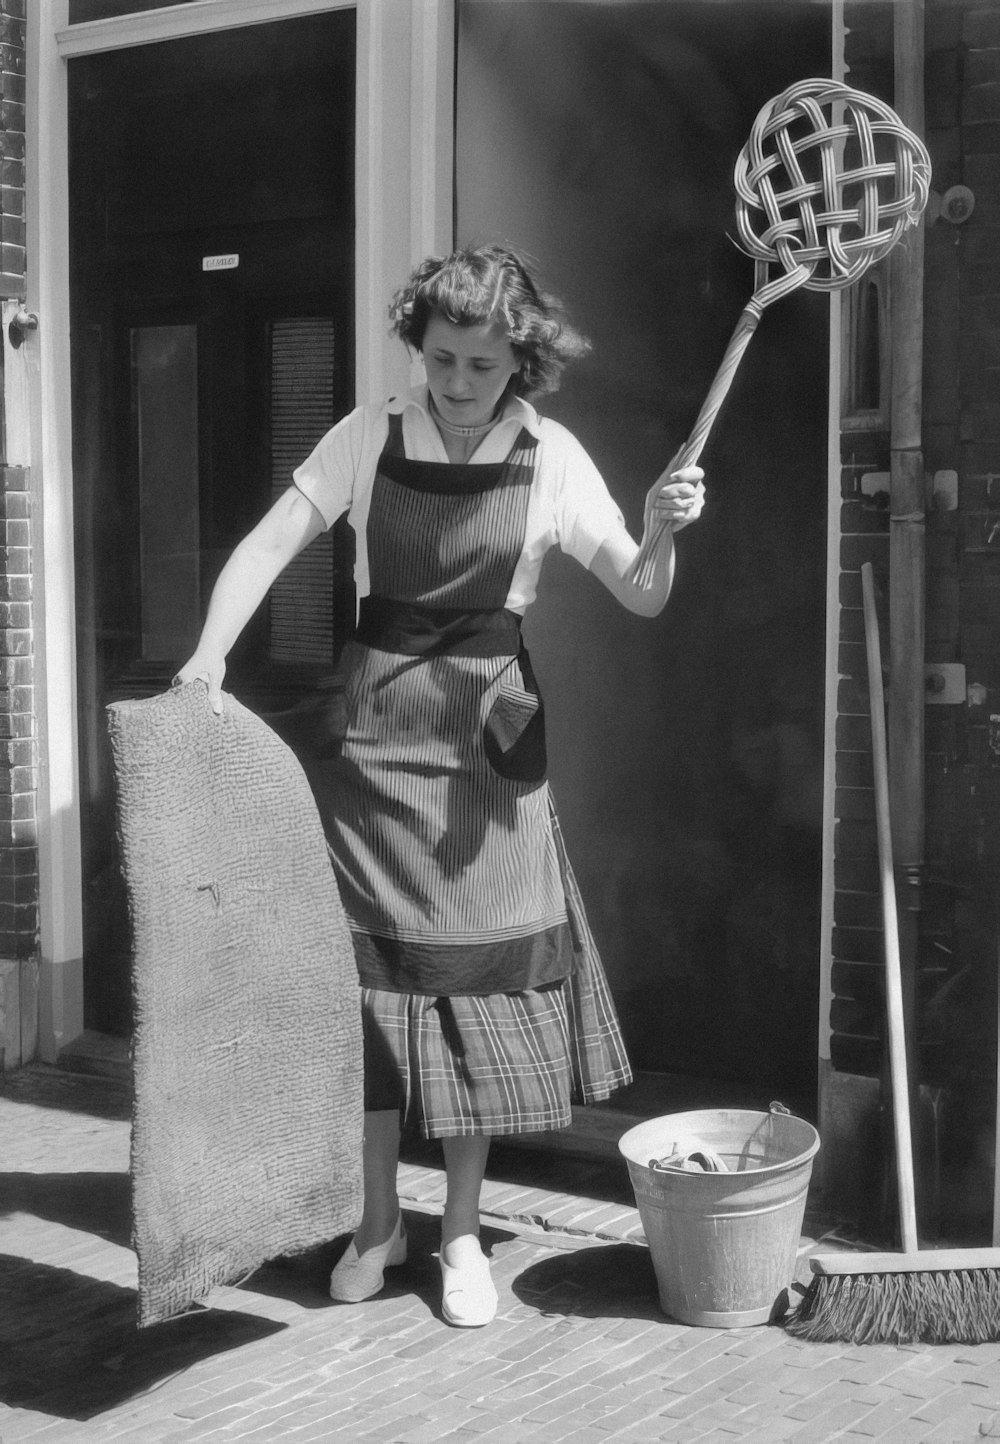 a woman in an apron is holding a broom